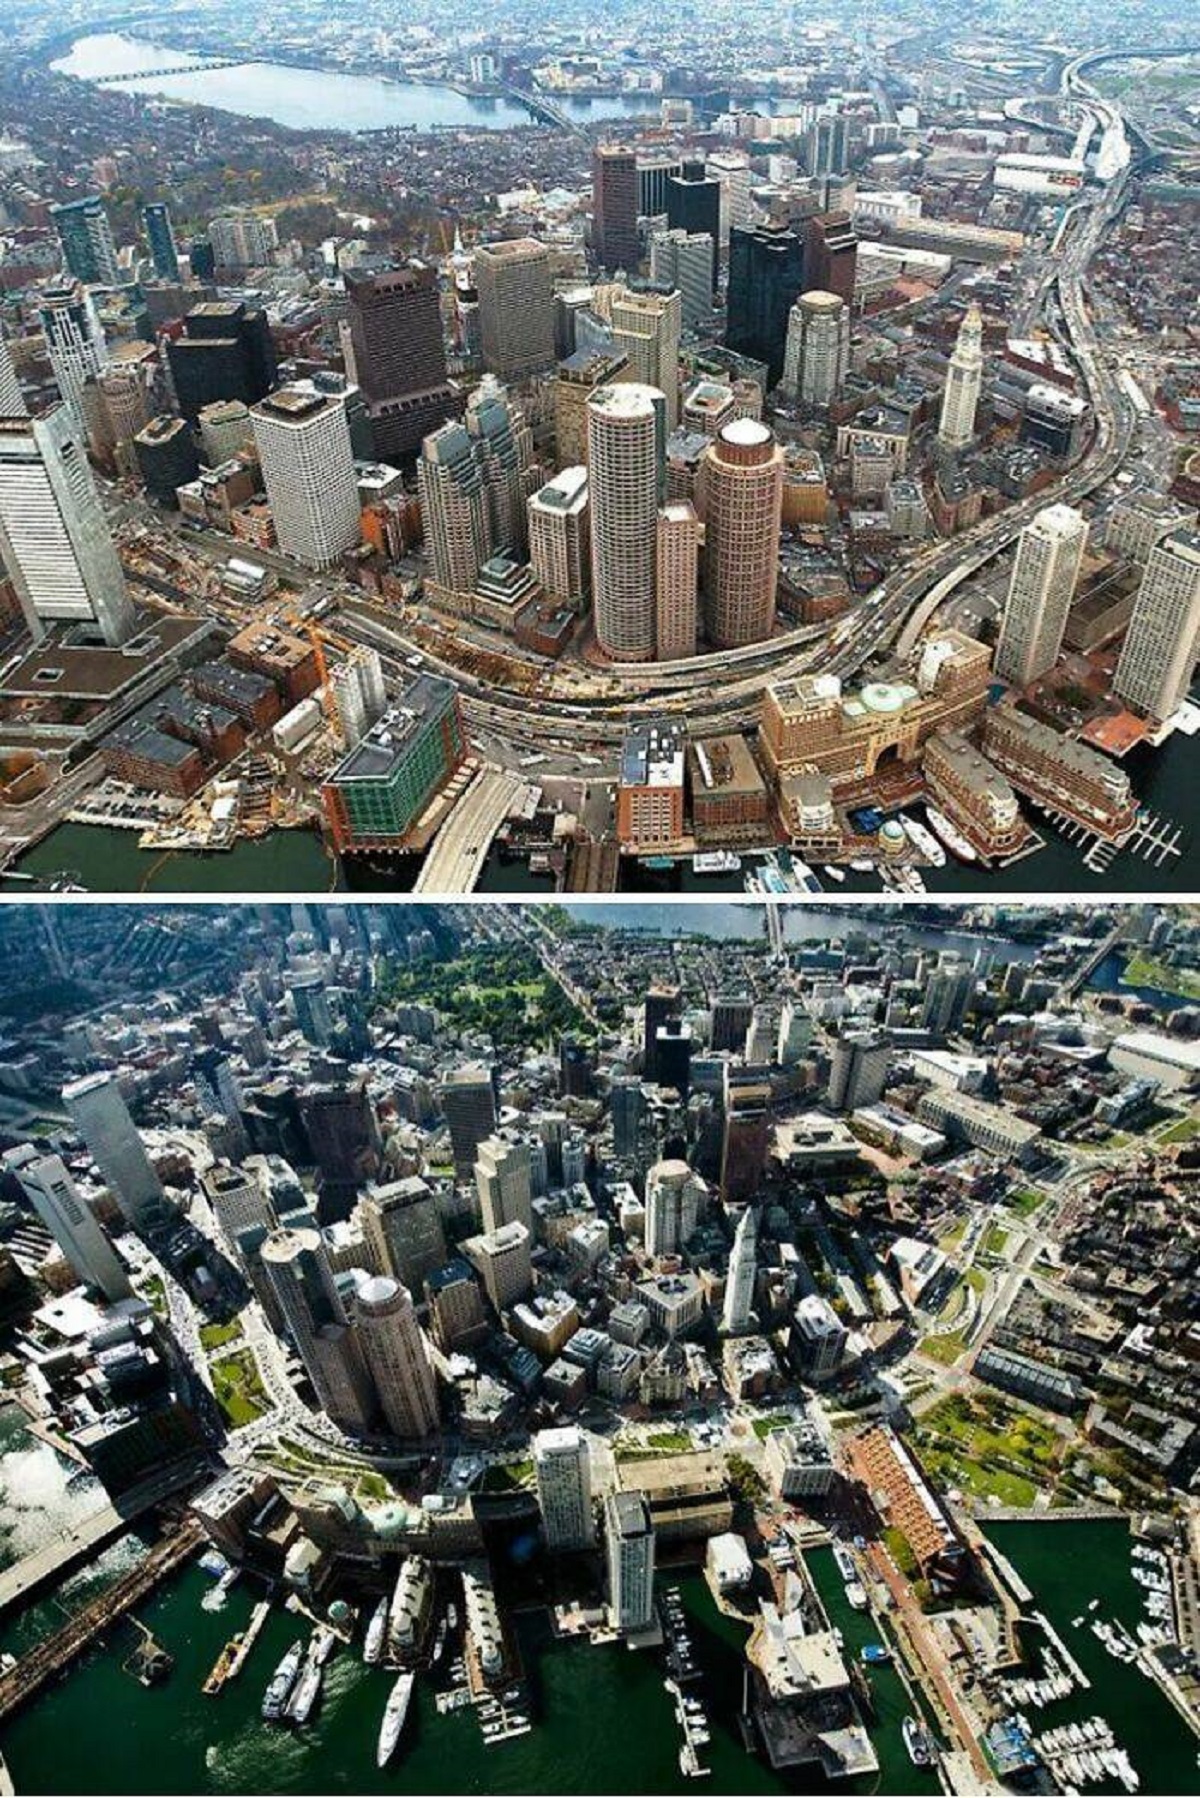 "Boston - Elevated Highway Moved Underground, Replaced With Green Space. (1990s V. 2010s)"